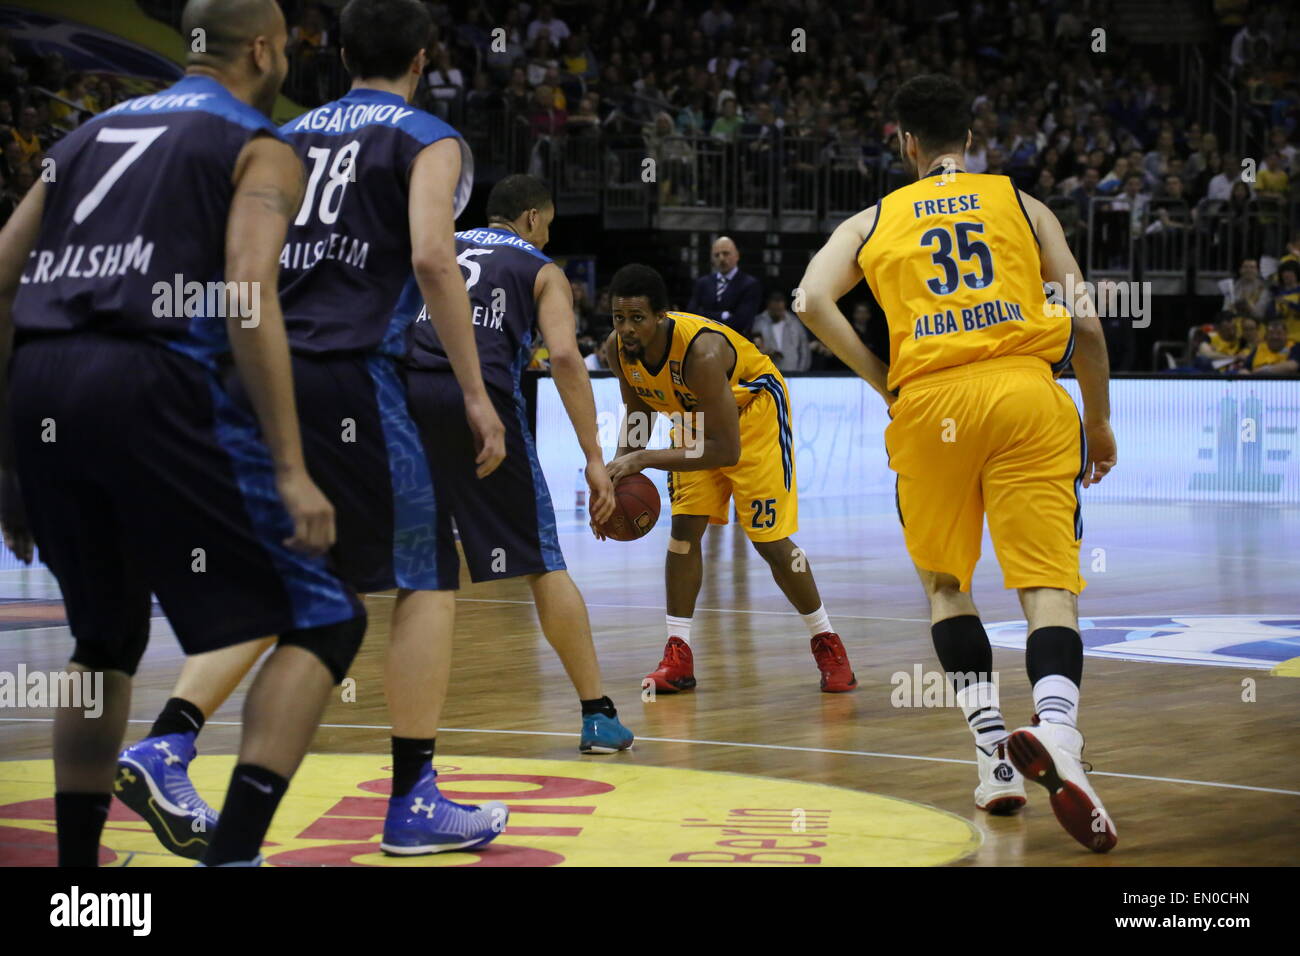 Berlin, Germany. 24th Apr, 2015. Clifford Hammonds(25) of Alba in action during BBL game Alba Berlin versus Crailsheim Merlins at O2 World. Credit:  Madeleine Lenz/Pacific Press/Alamy Live News Stock Photo